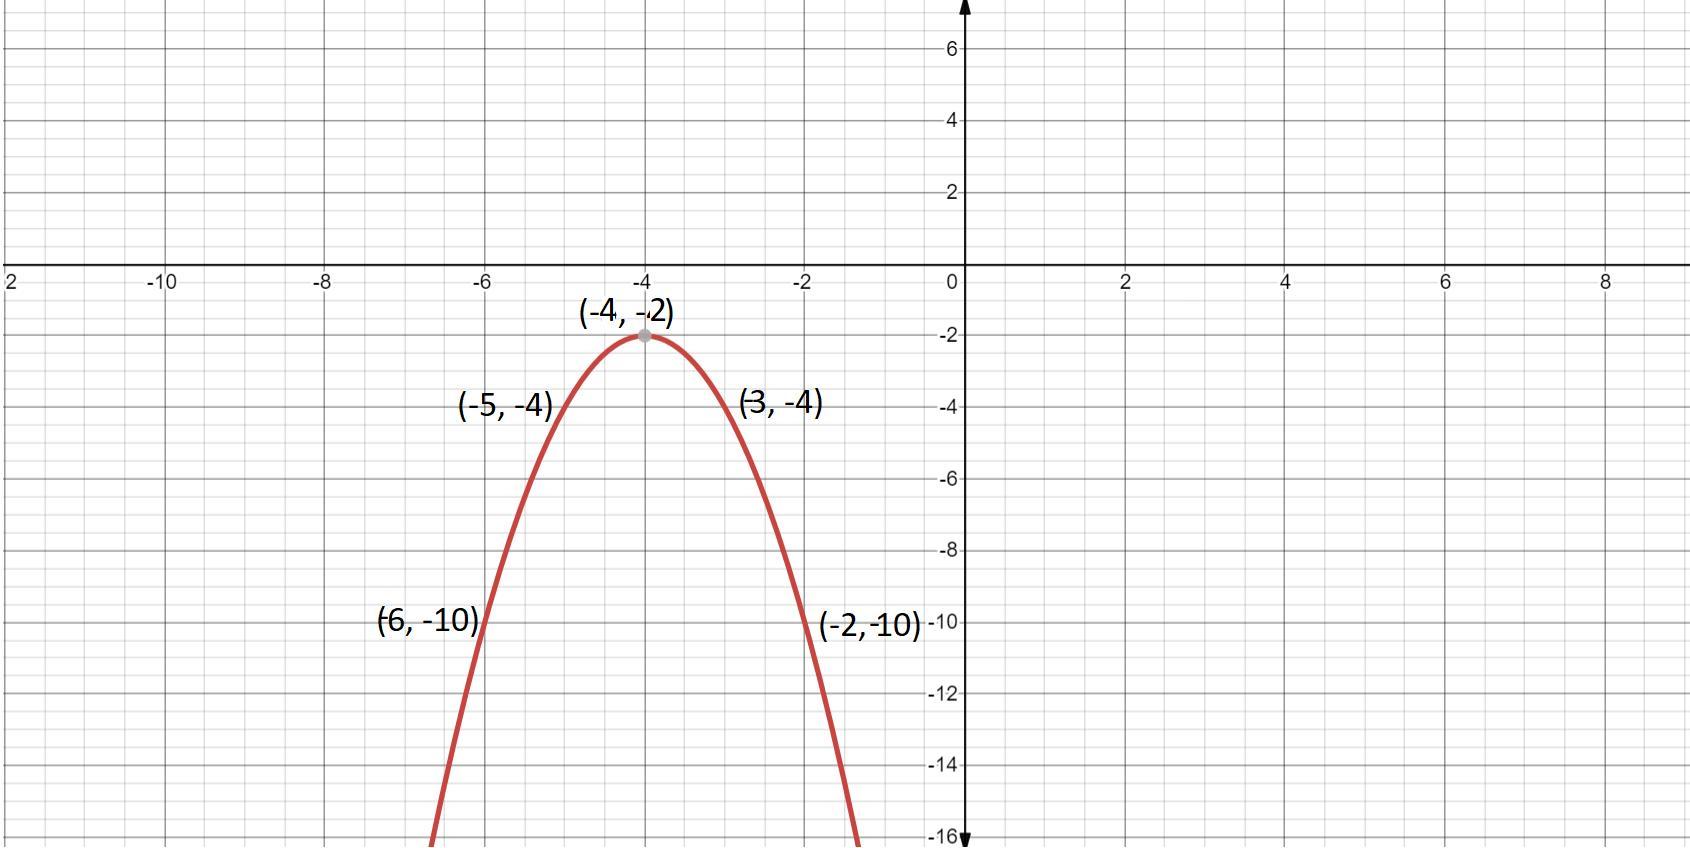 Graph The Parabola.Y = -2x^2 - 16x - 34Plat Five Points On A Parable The Vertex ,two Points To The Left